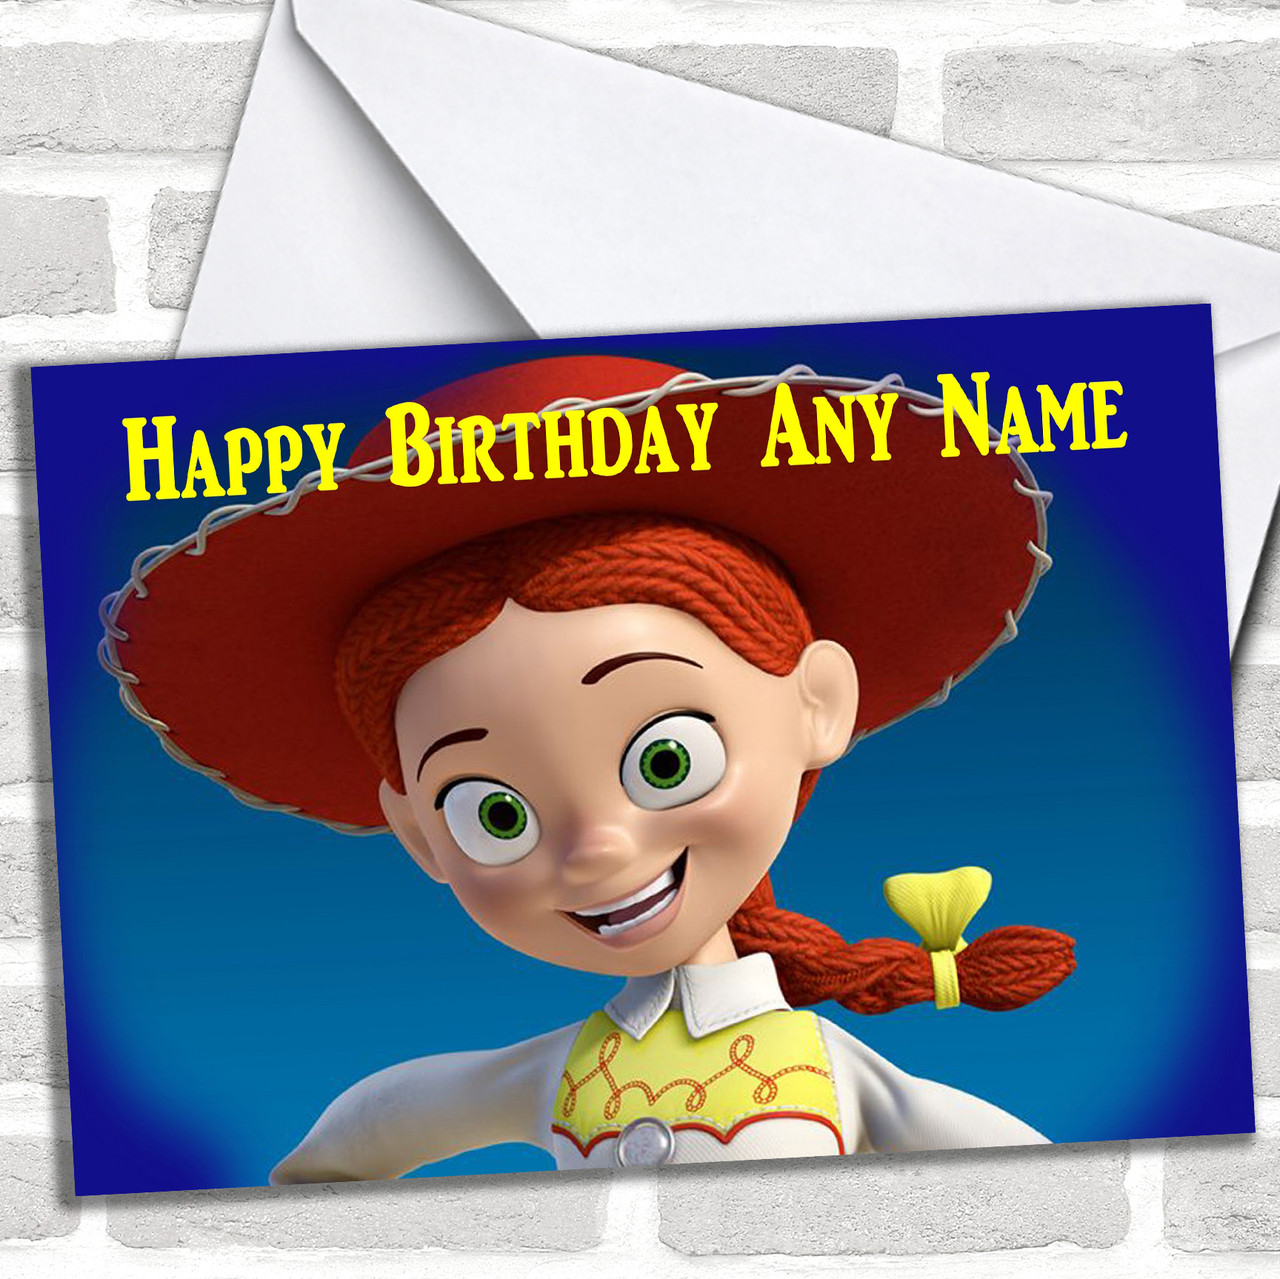 TOY STORY Personalised Birthday Card - Woody and Jessie